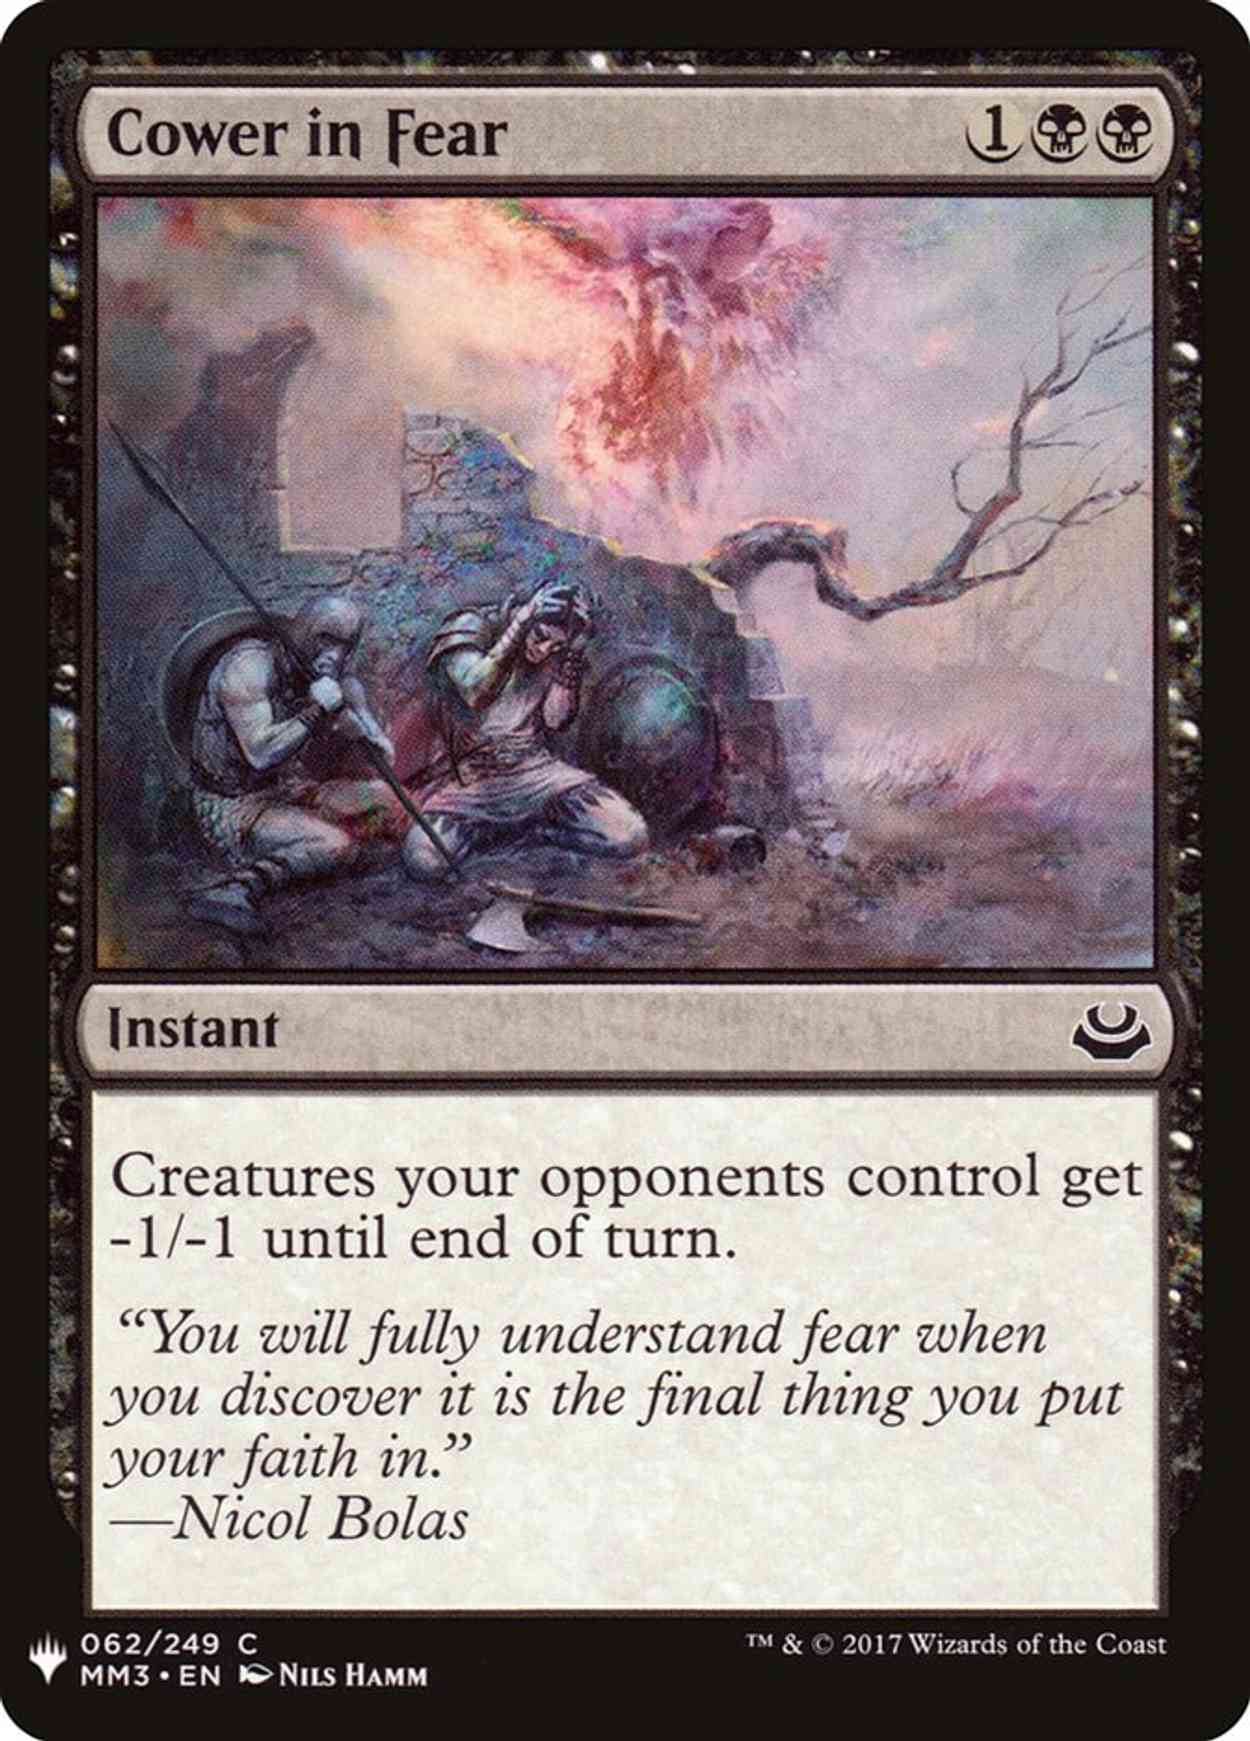 Cower in Fear magic card front